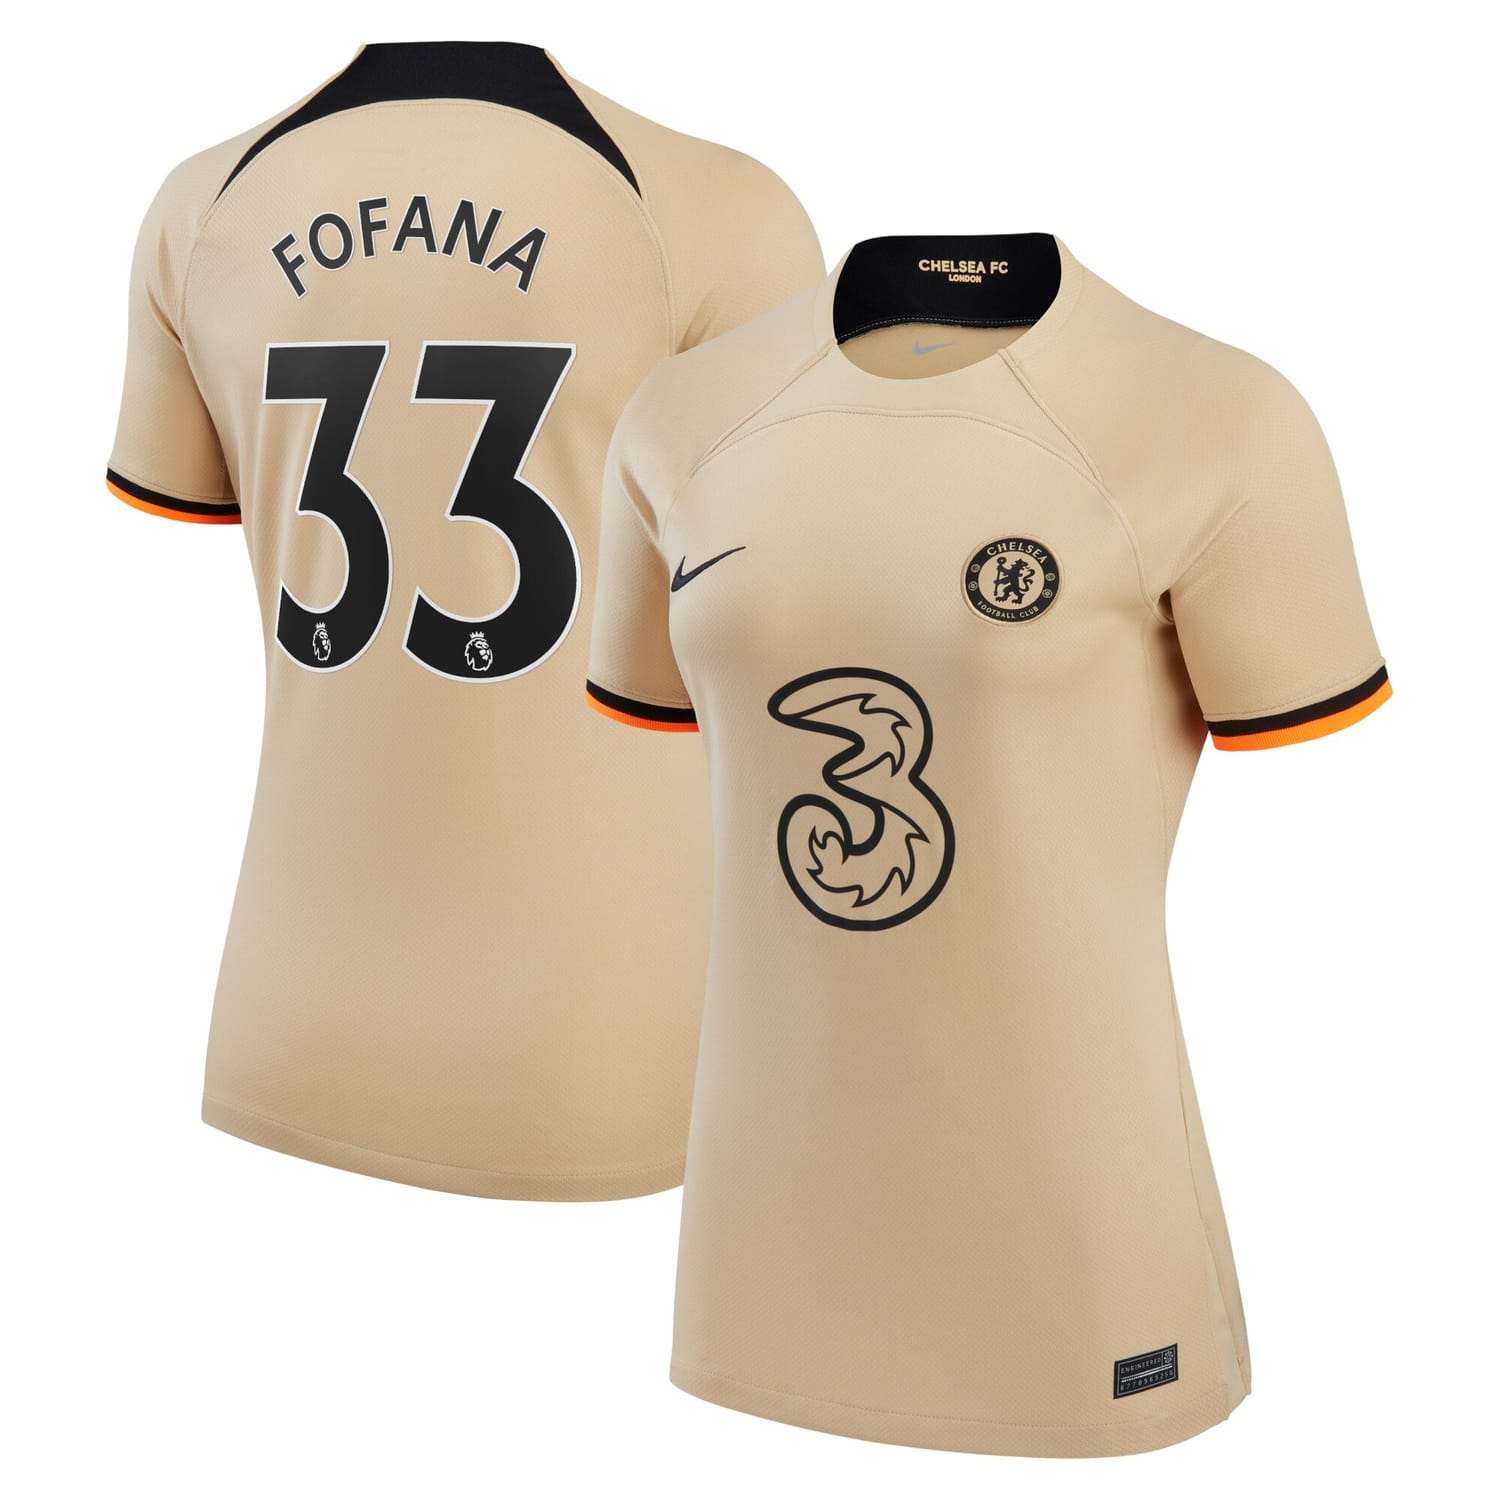 Premier League Chelsea Third Jersey Shirt 2022-23 player Wesley Fofana 33 printing for Women